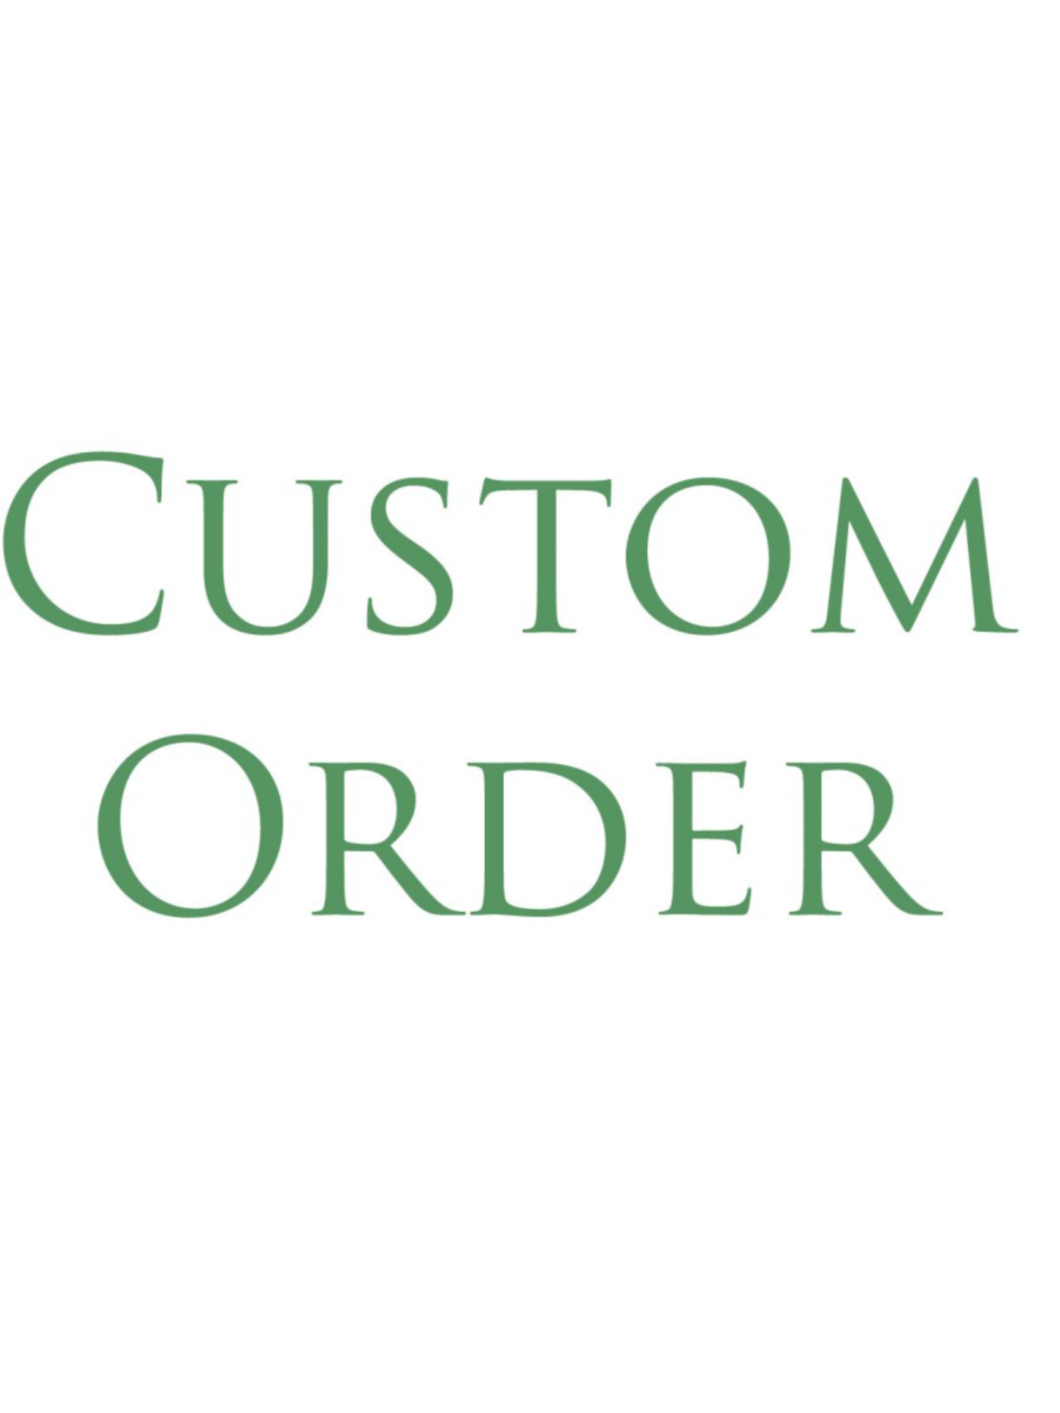 Custom order for russianidiot